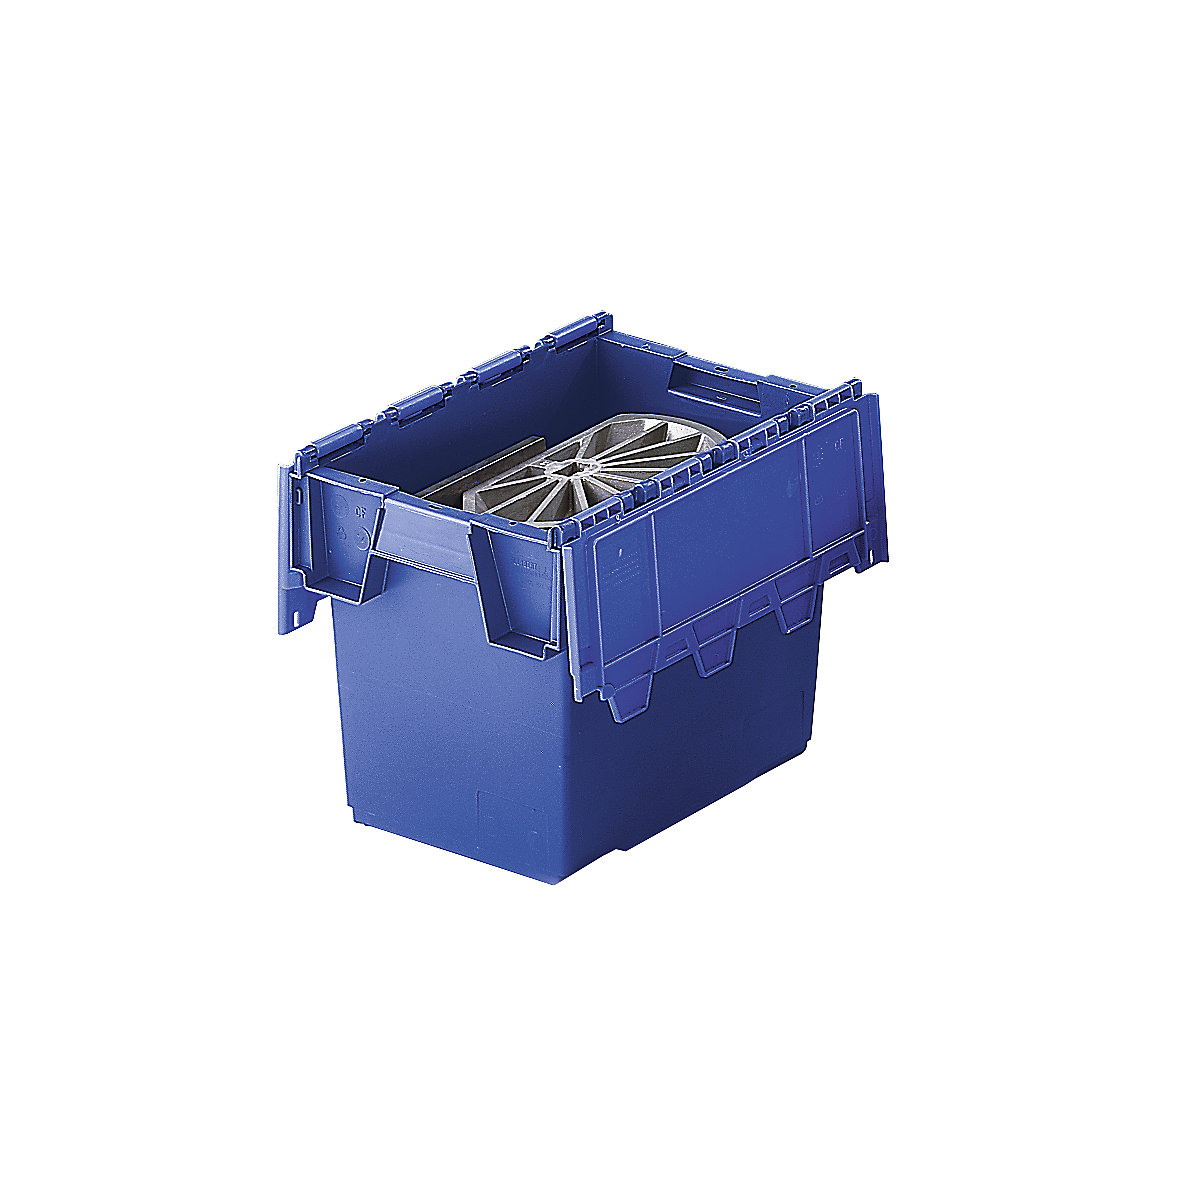 KAIMAN reusable stacking container, capacity 25 litres, LxWxH 400 x 300 x 320 mm, blue, 10+ items